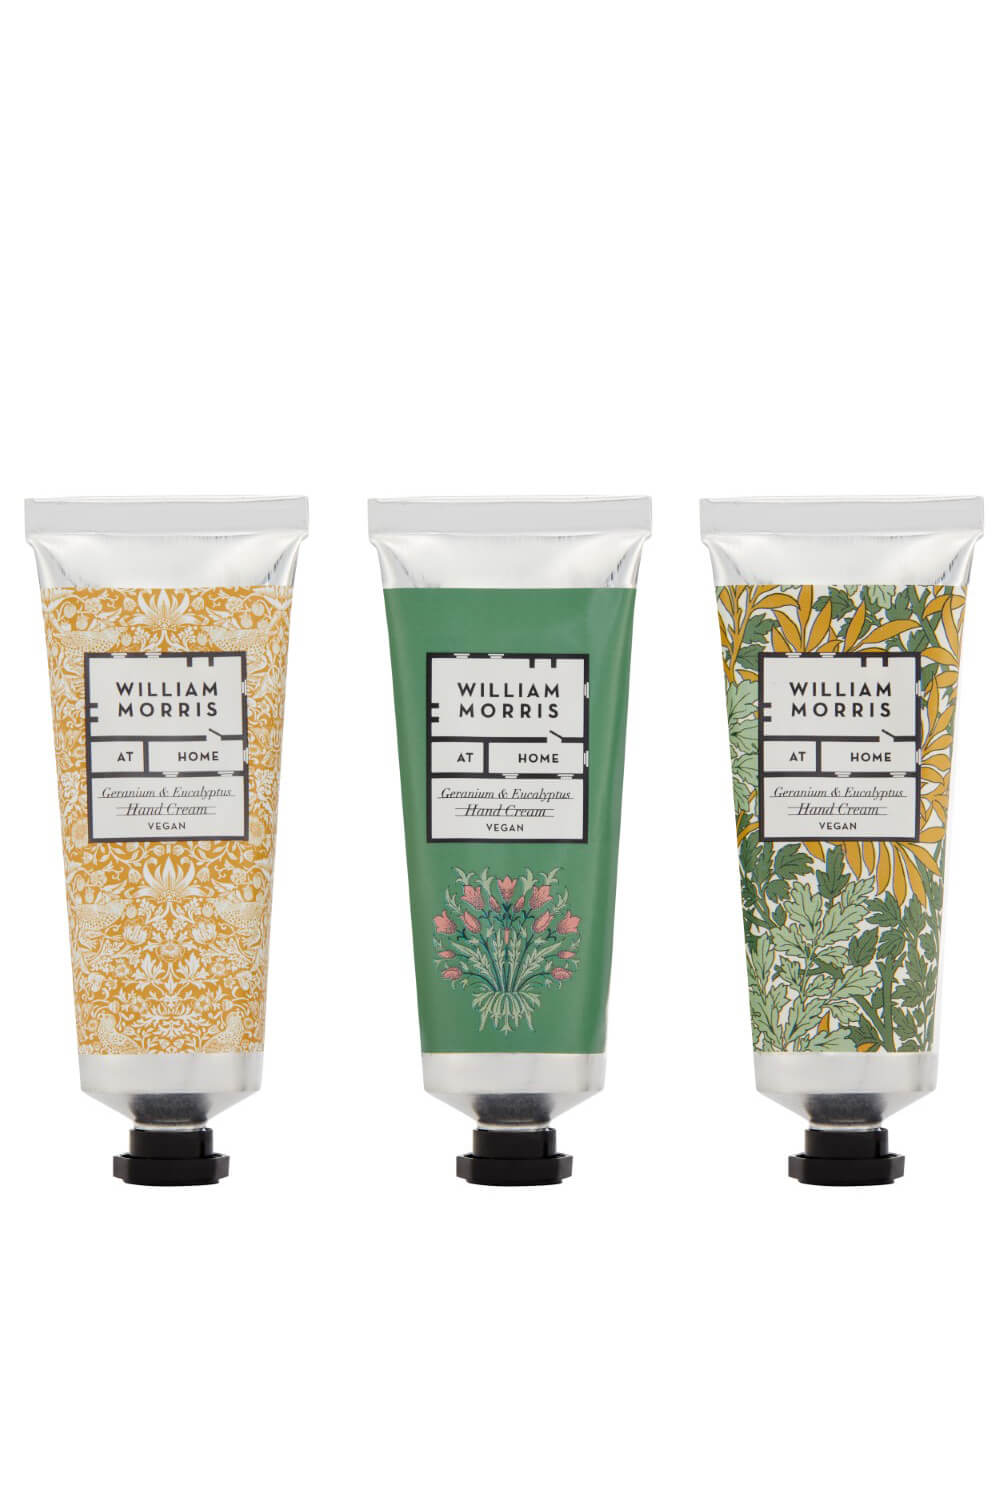 Green Heathcote & Ivory - Hand Cream Collection, Image 4 of 5